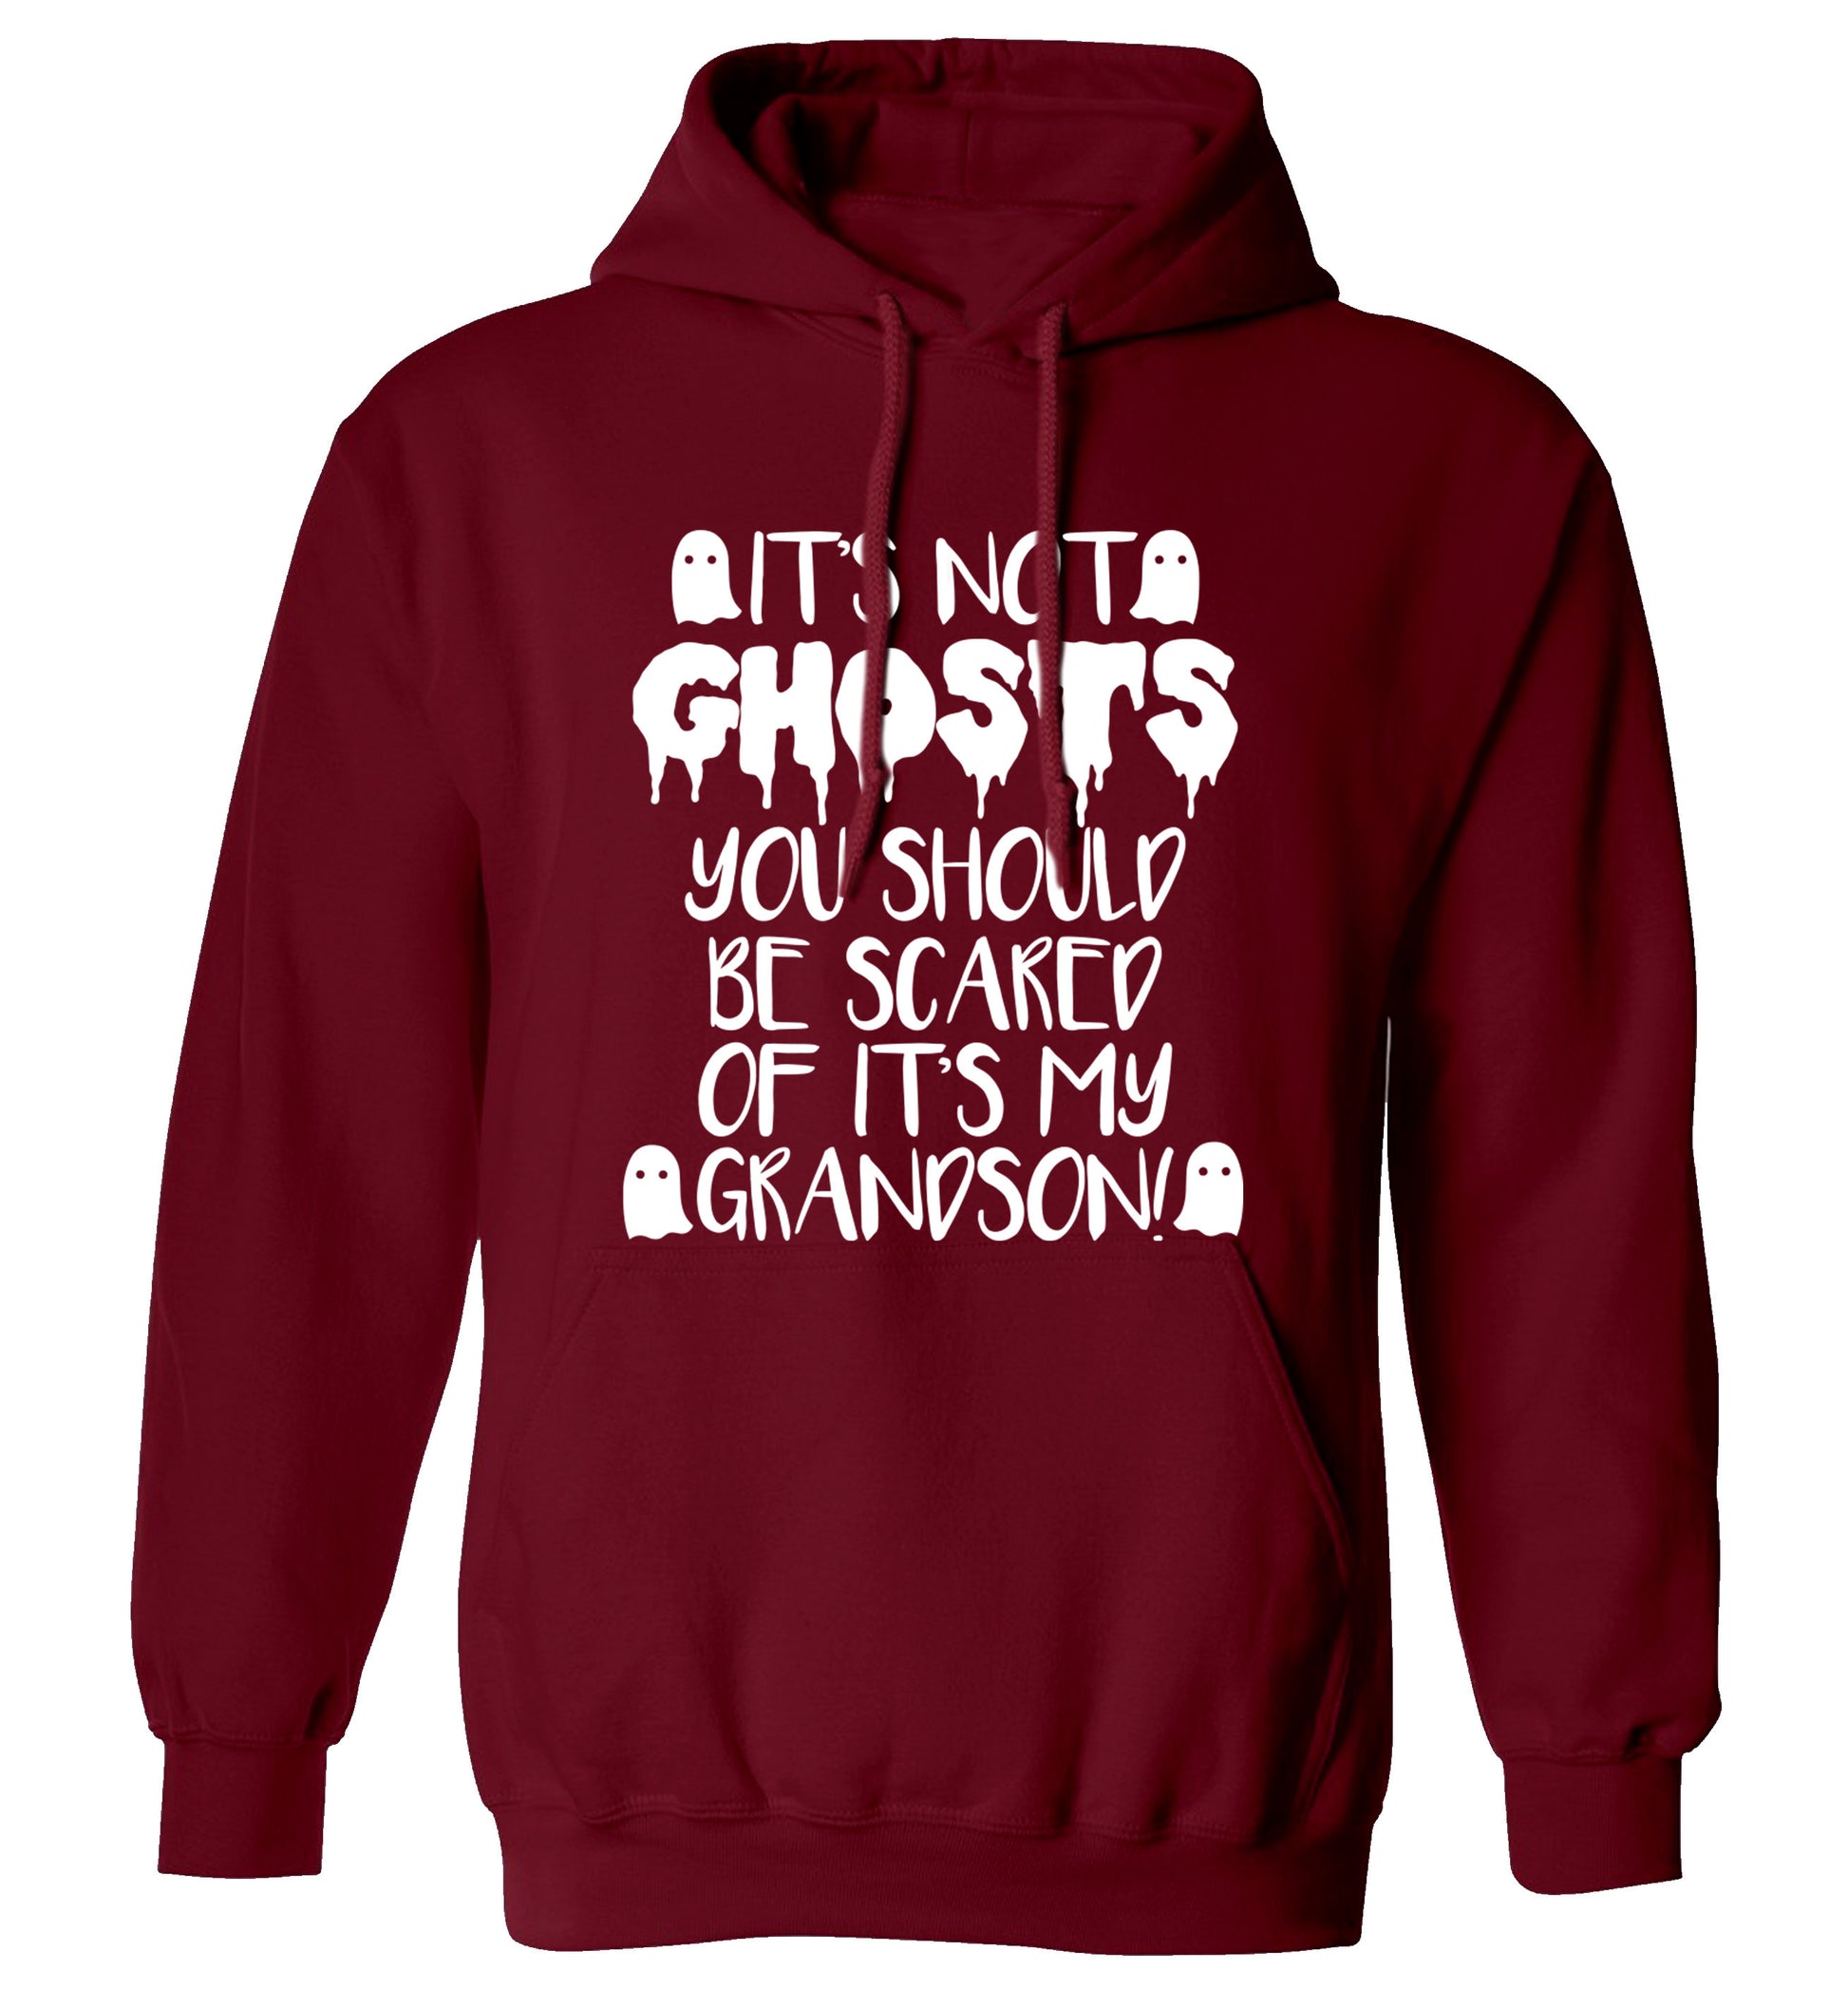 It's not ghosts you should be scared of it's my grandson! adults unisex maroon hoodie 2XL